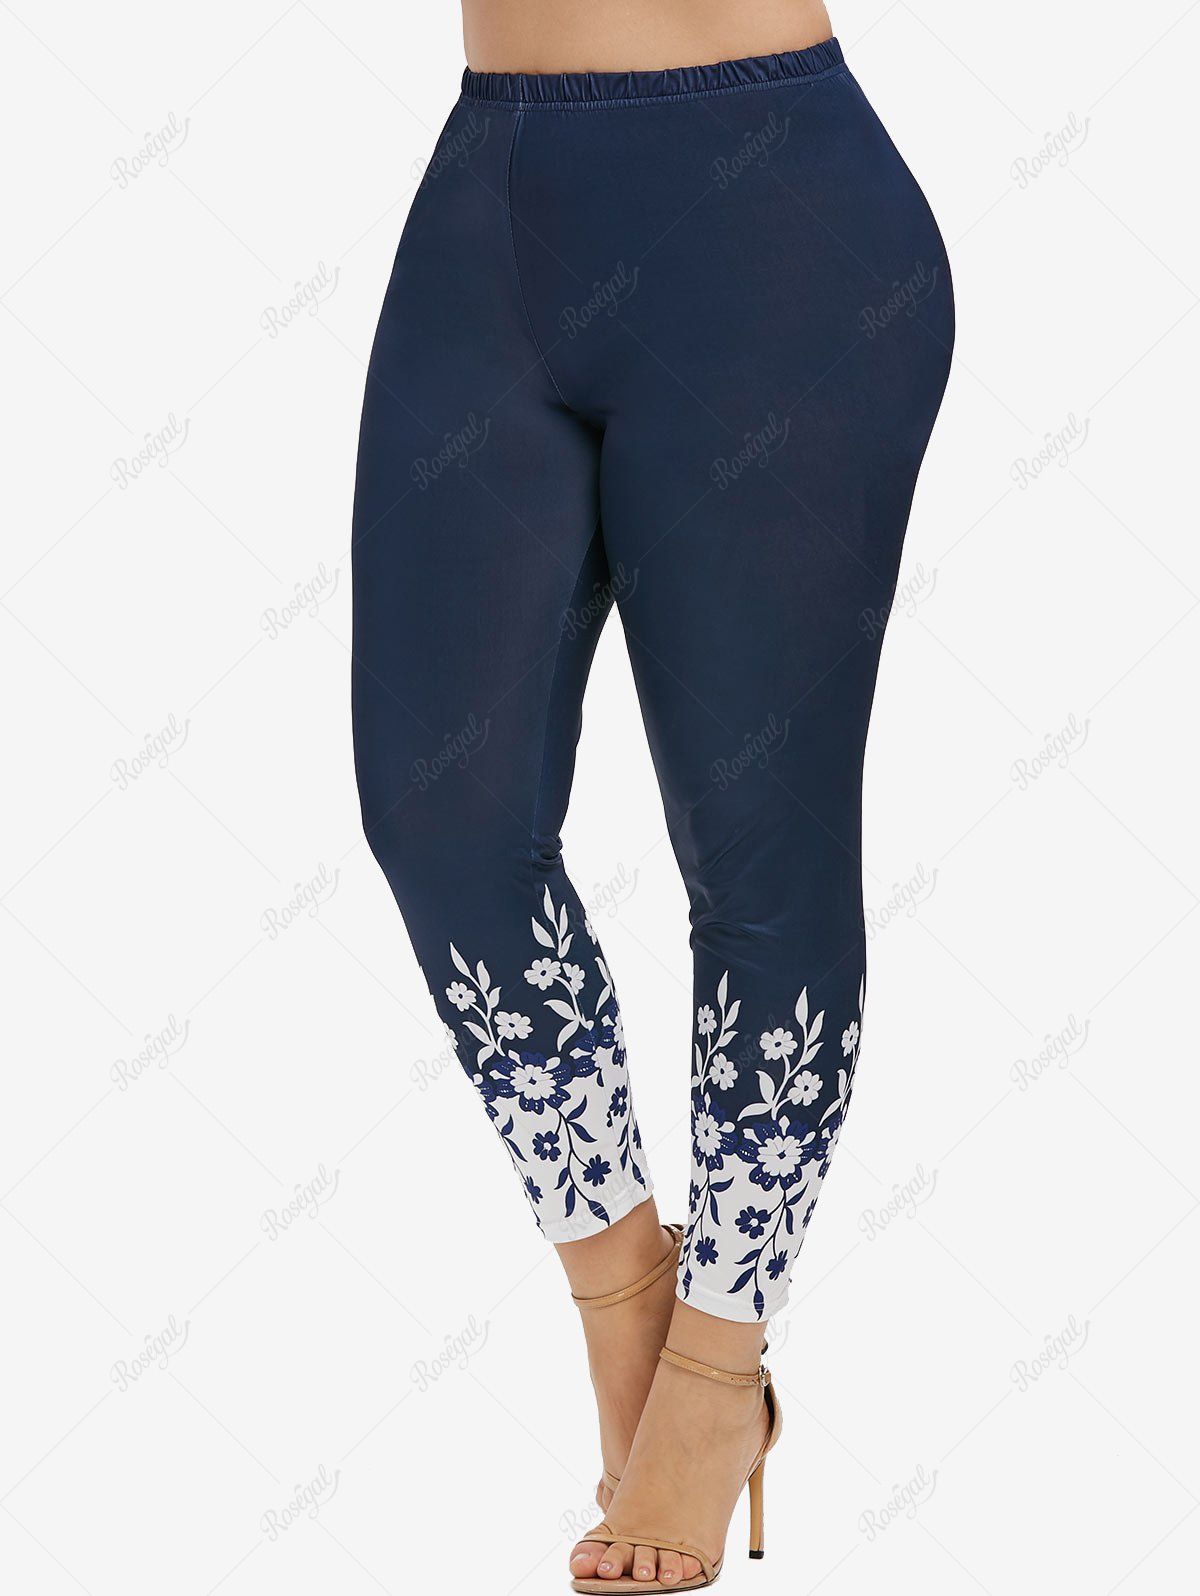 Trendy Plus Size High Waisted Floral Print Skinny Leggings  